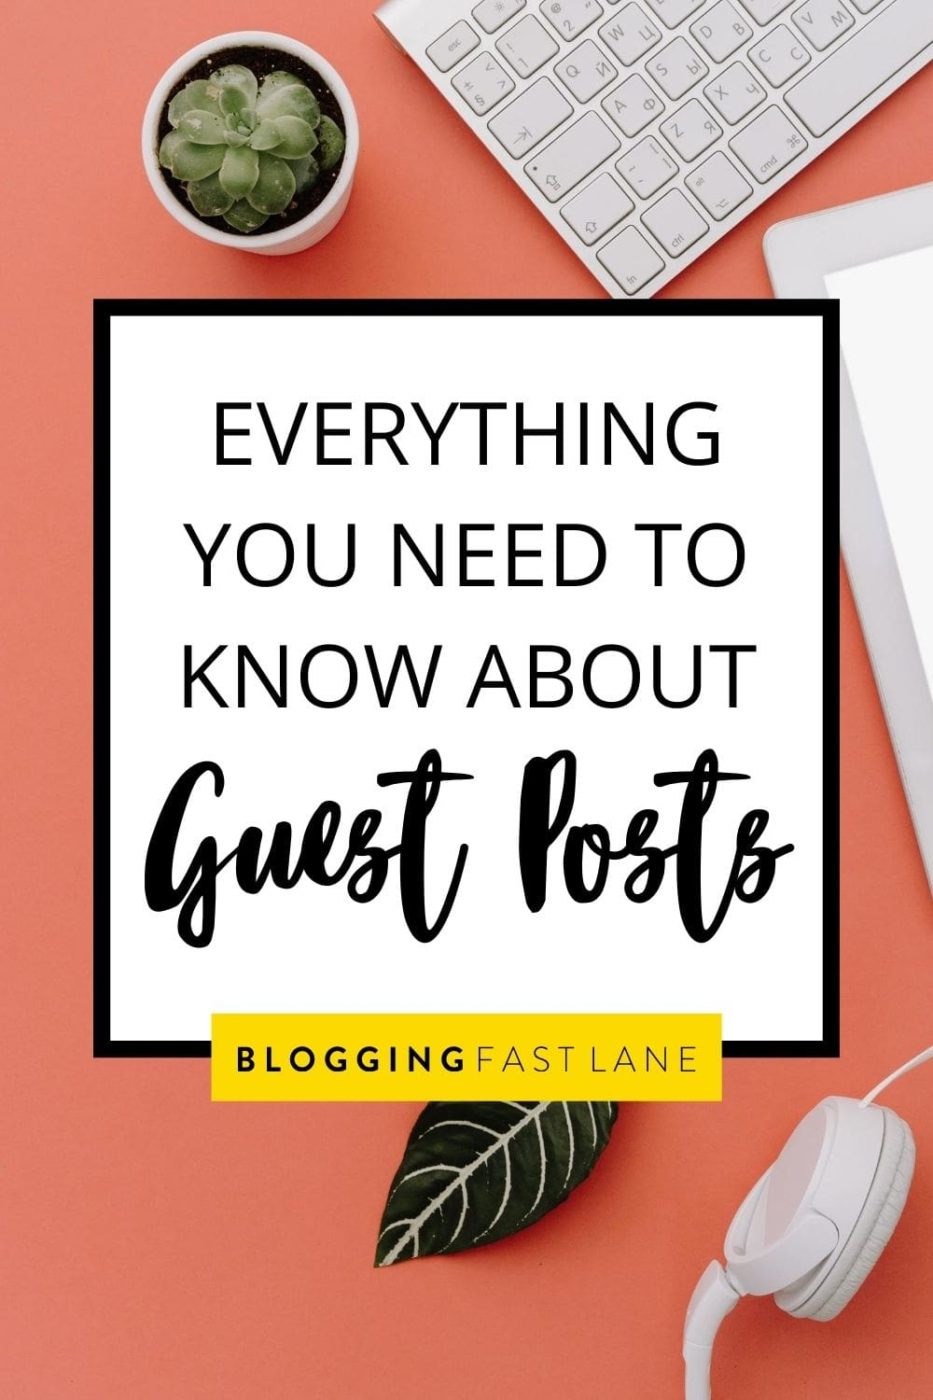 Guest Posting | Guest posts can do wonders for increasing your blog's traffic and authority online. Click here to read our complete guide to finding and writing guest posts!